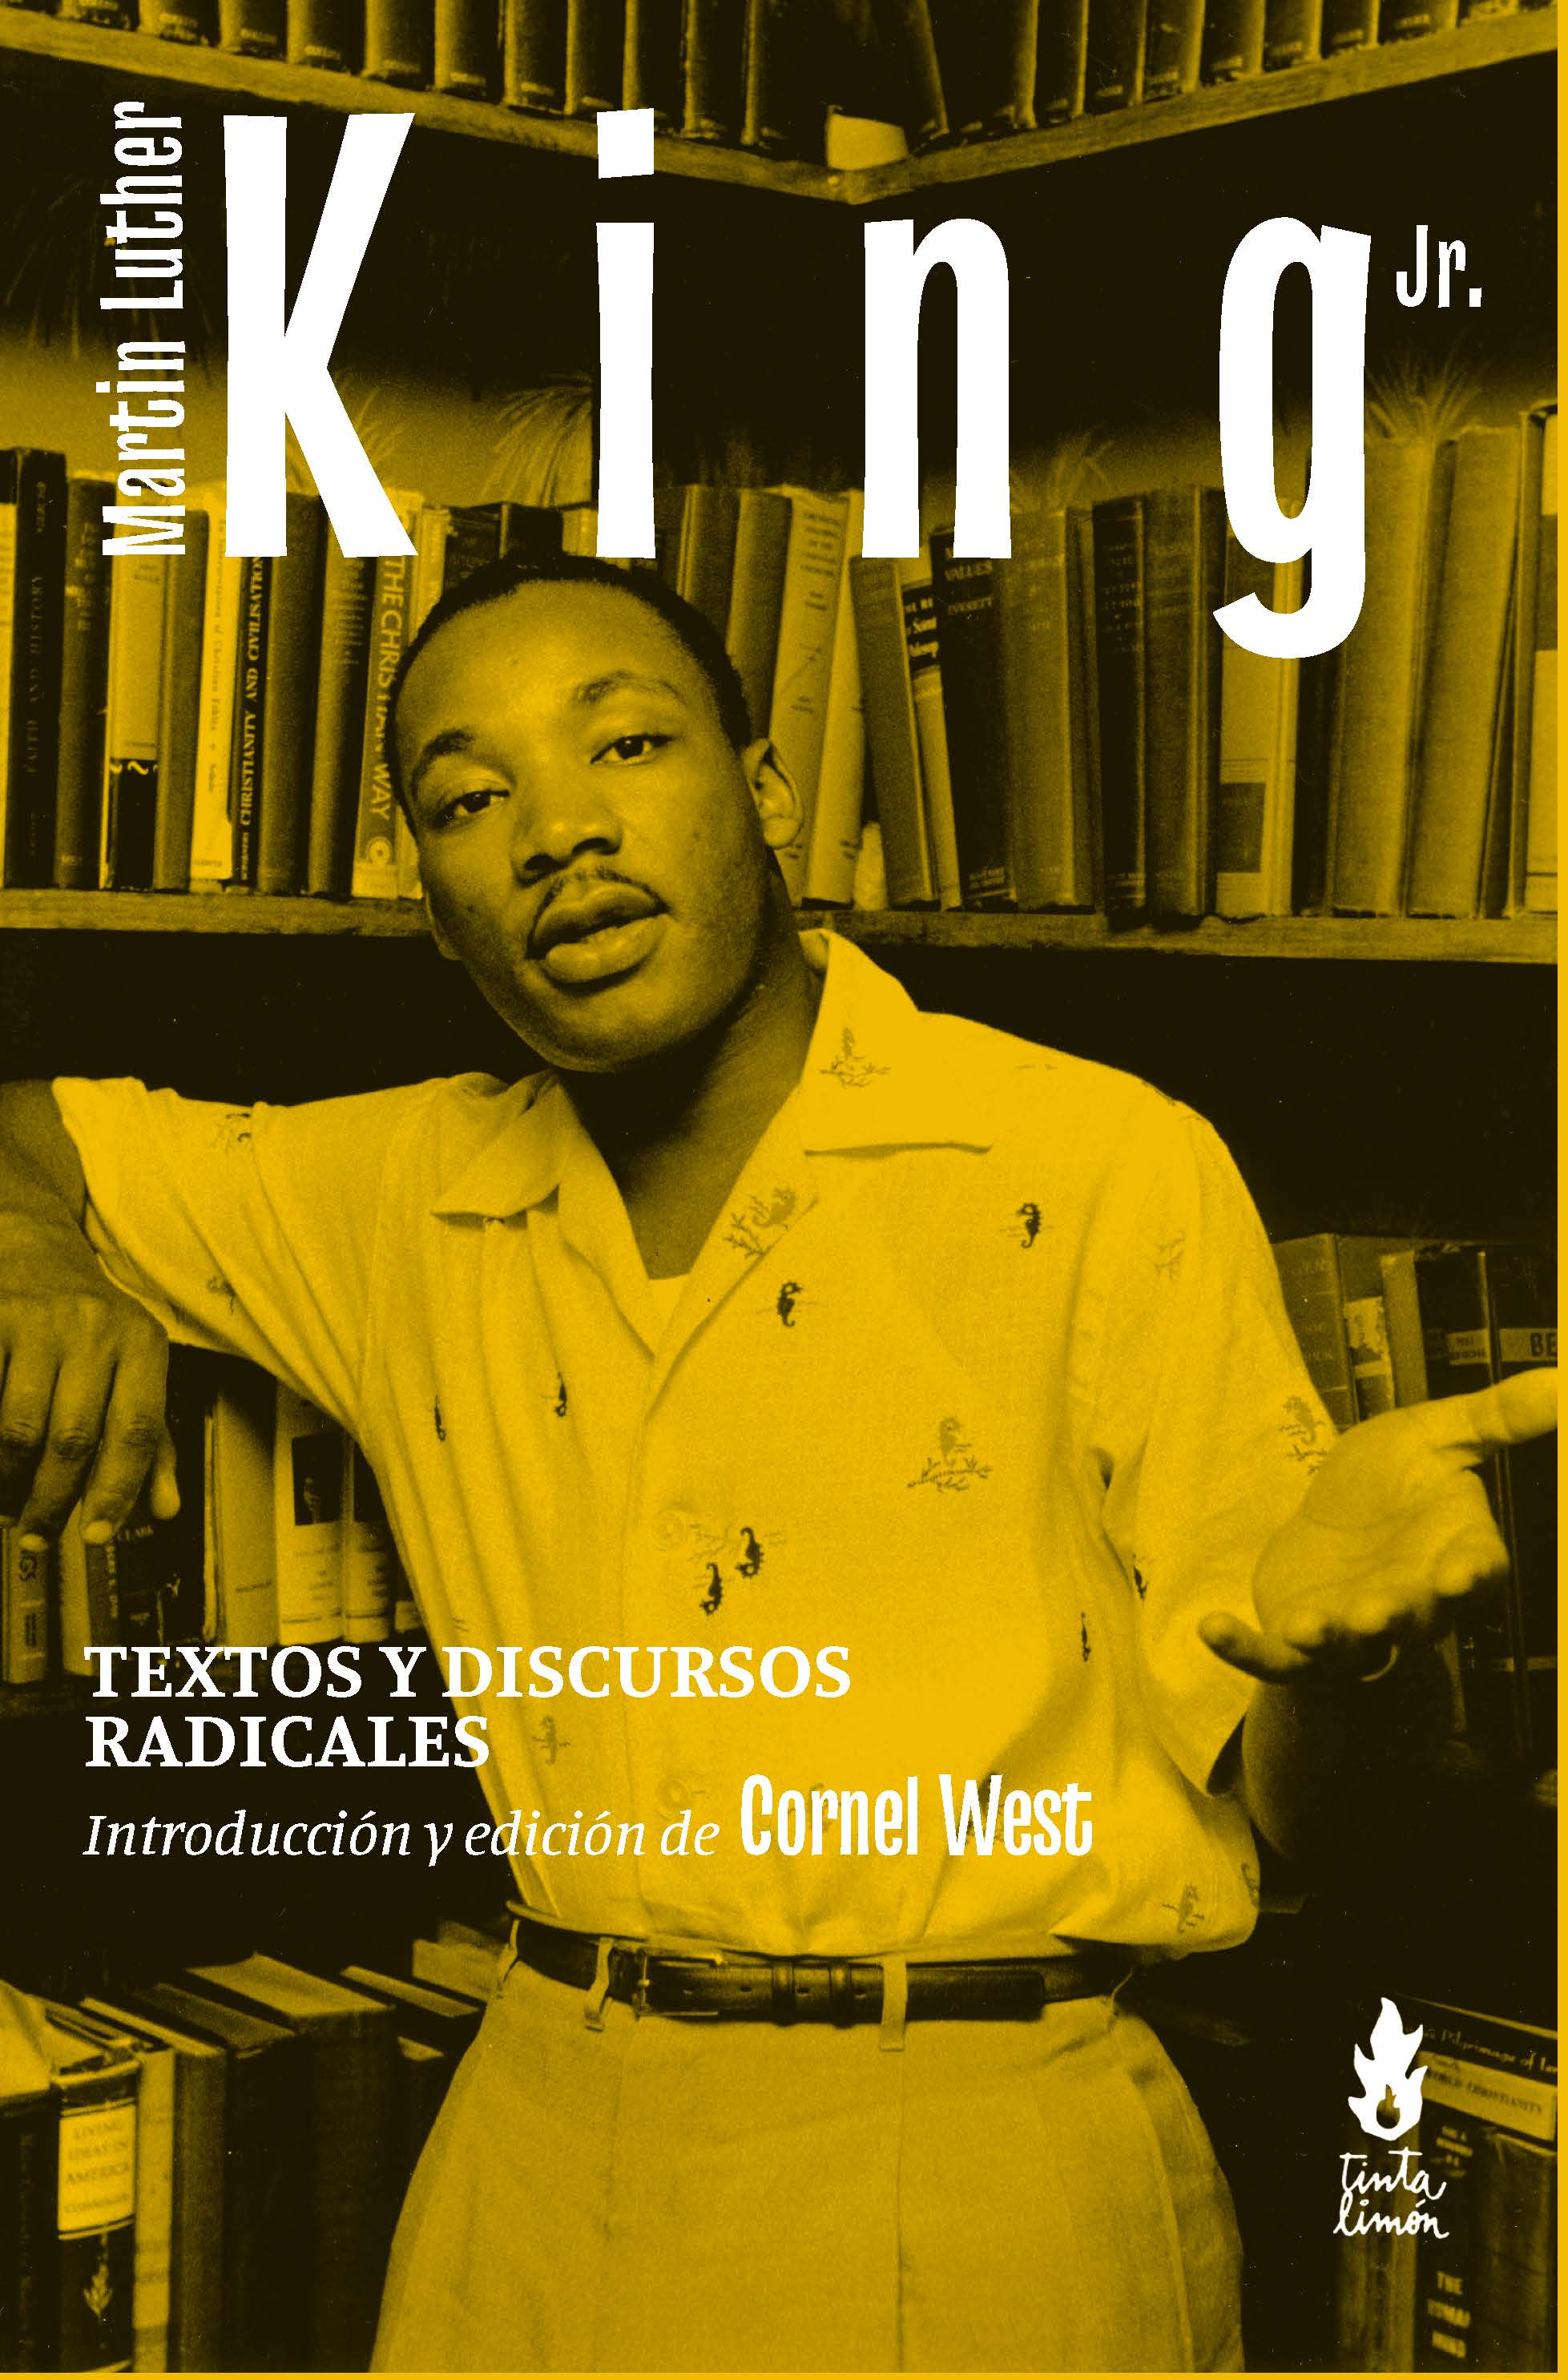 textos-y-discursos-radicales-martin-luther-king-jr-9789873687938